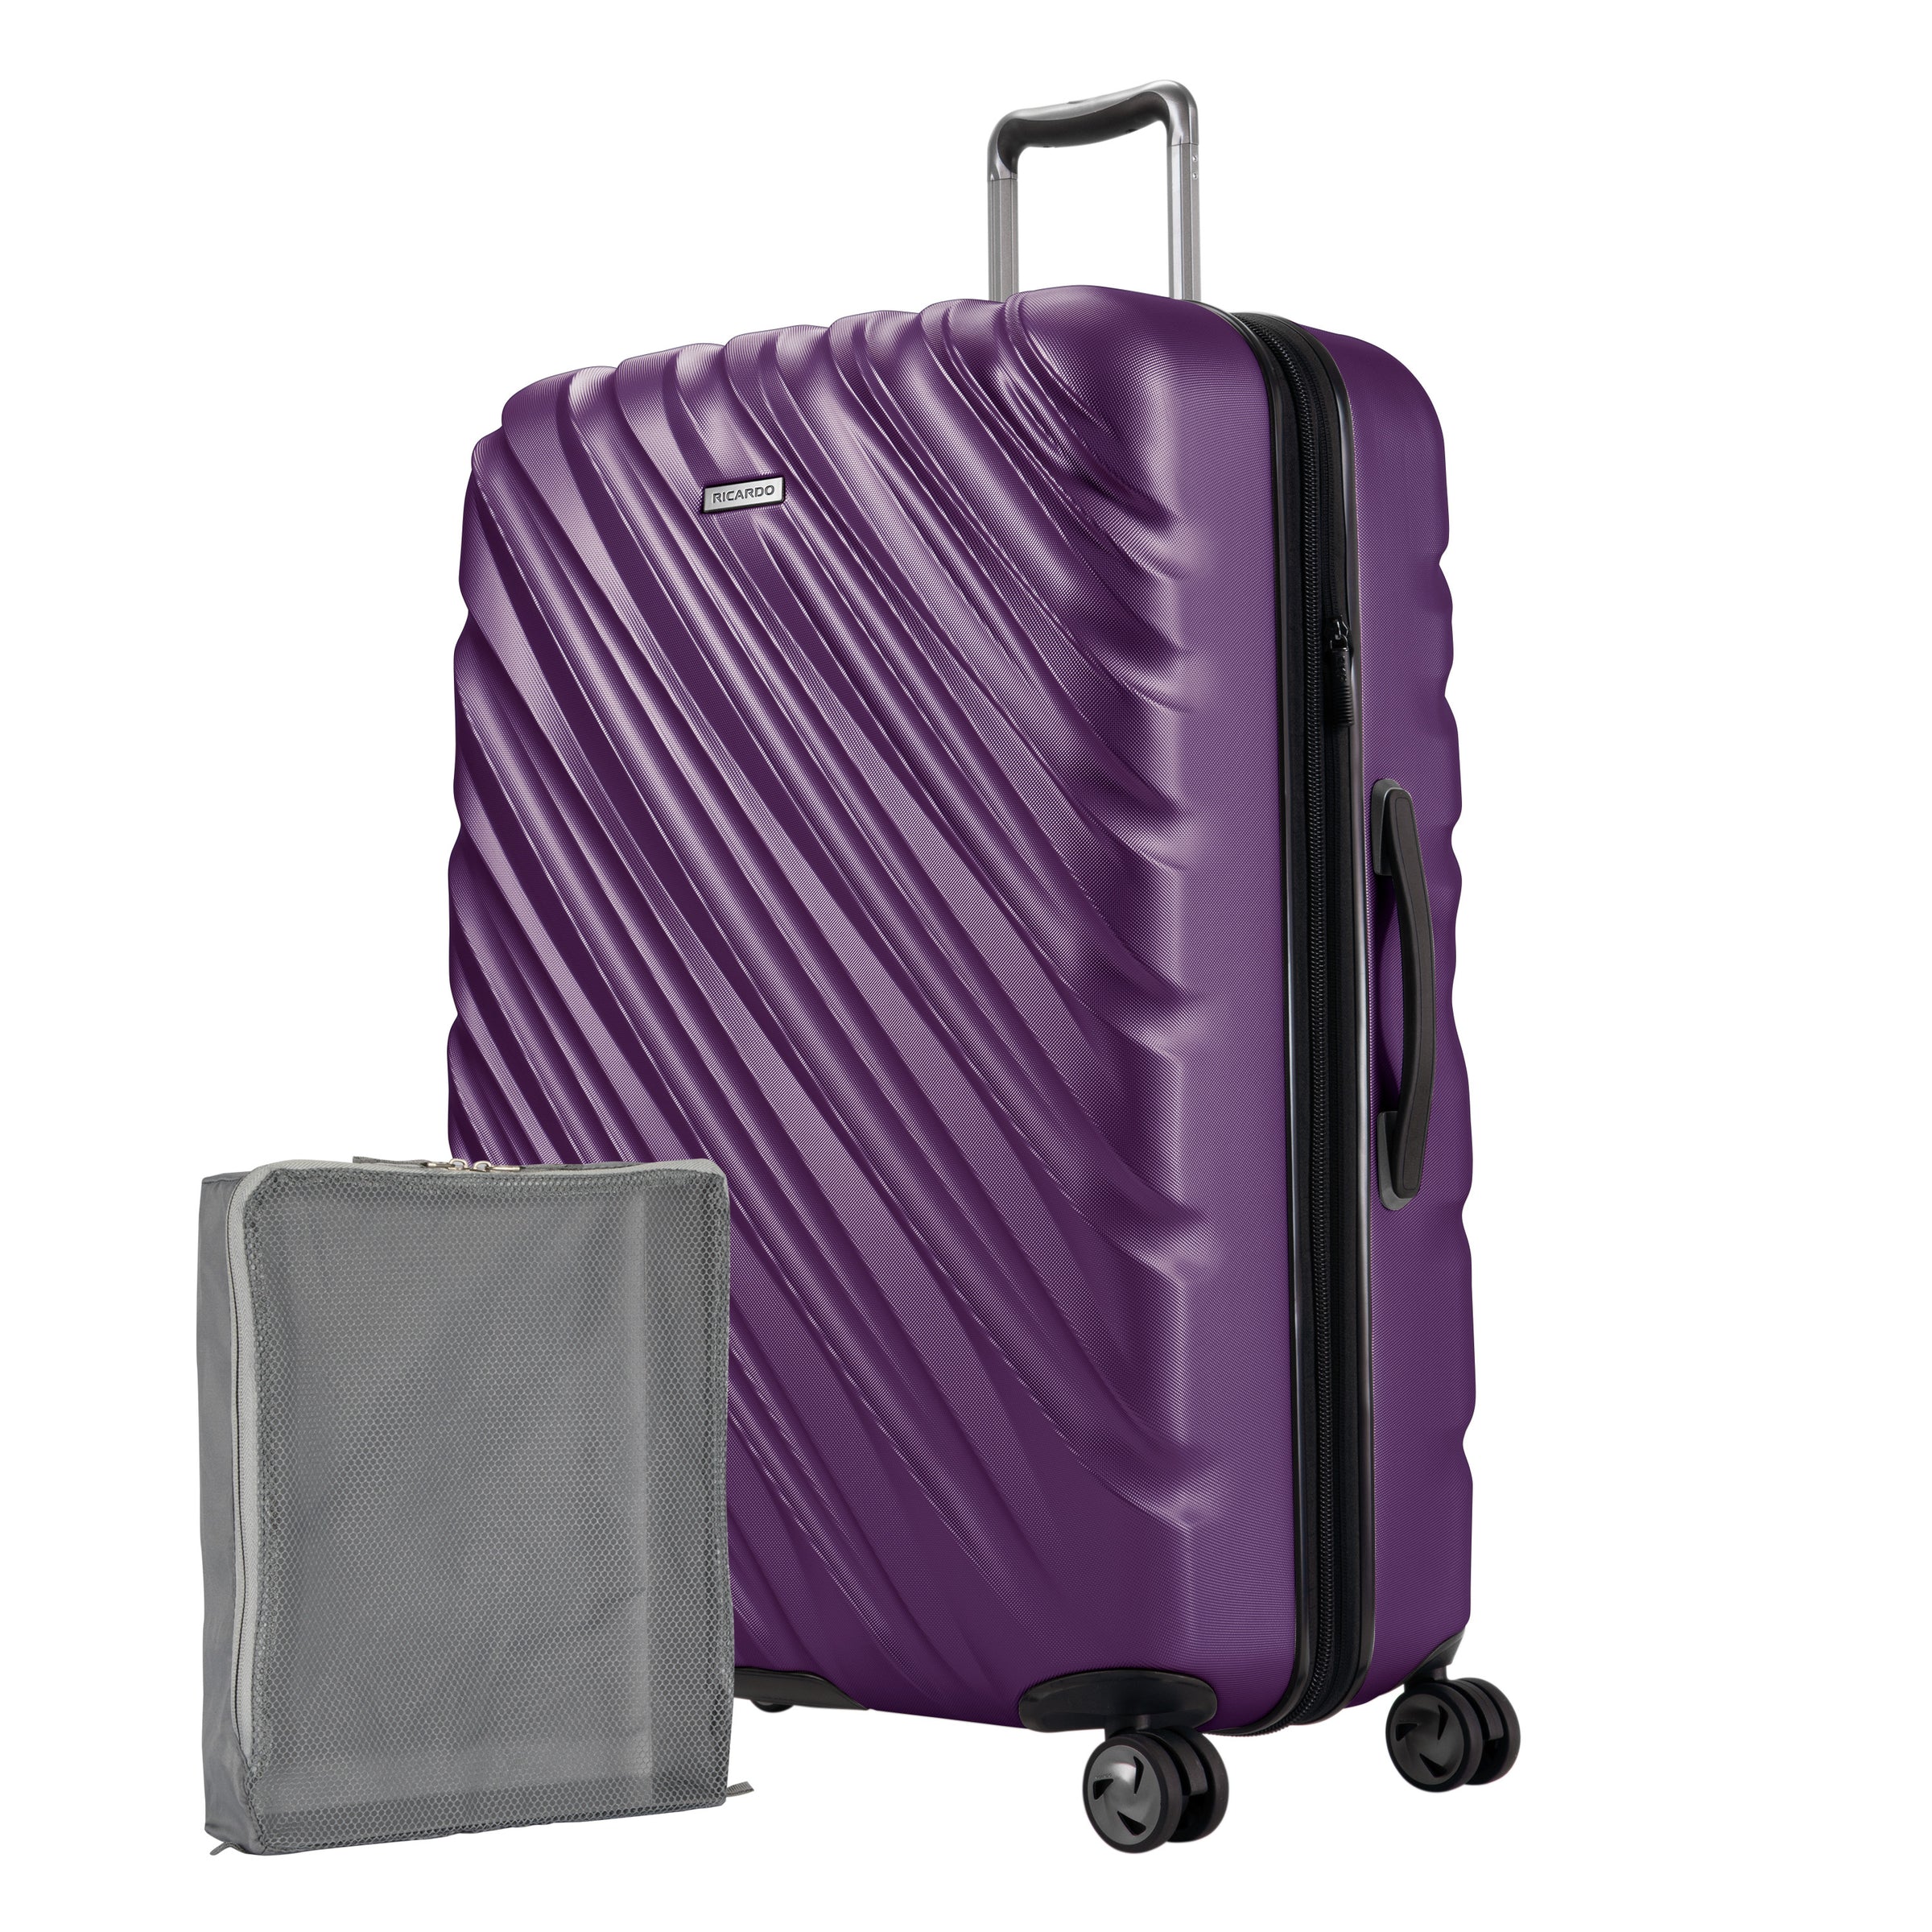 Aubergine purple Ricardo Mojave hardside suitcase with diagonal grooves shown with a large grey packing cube